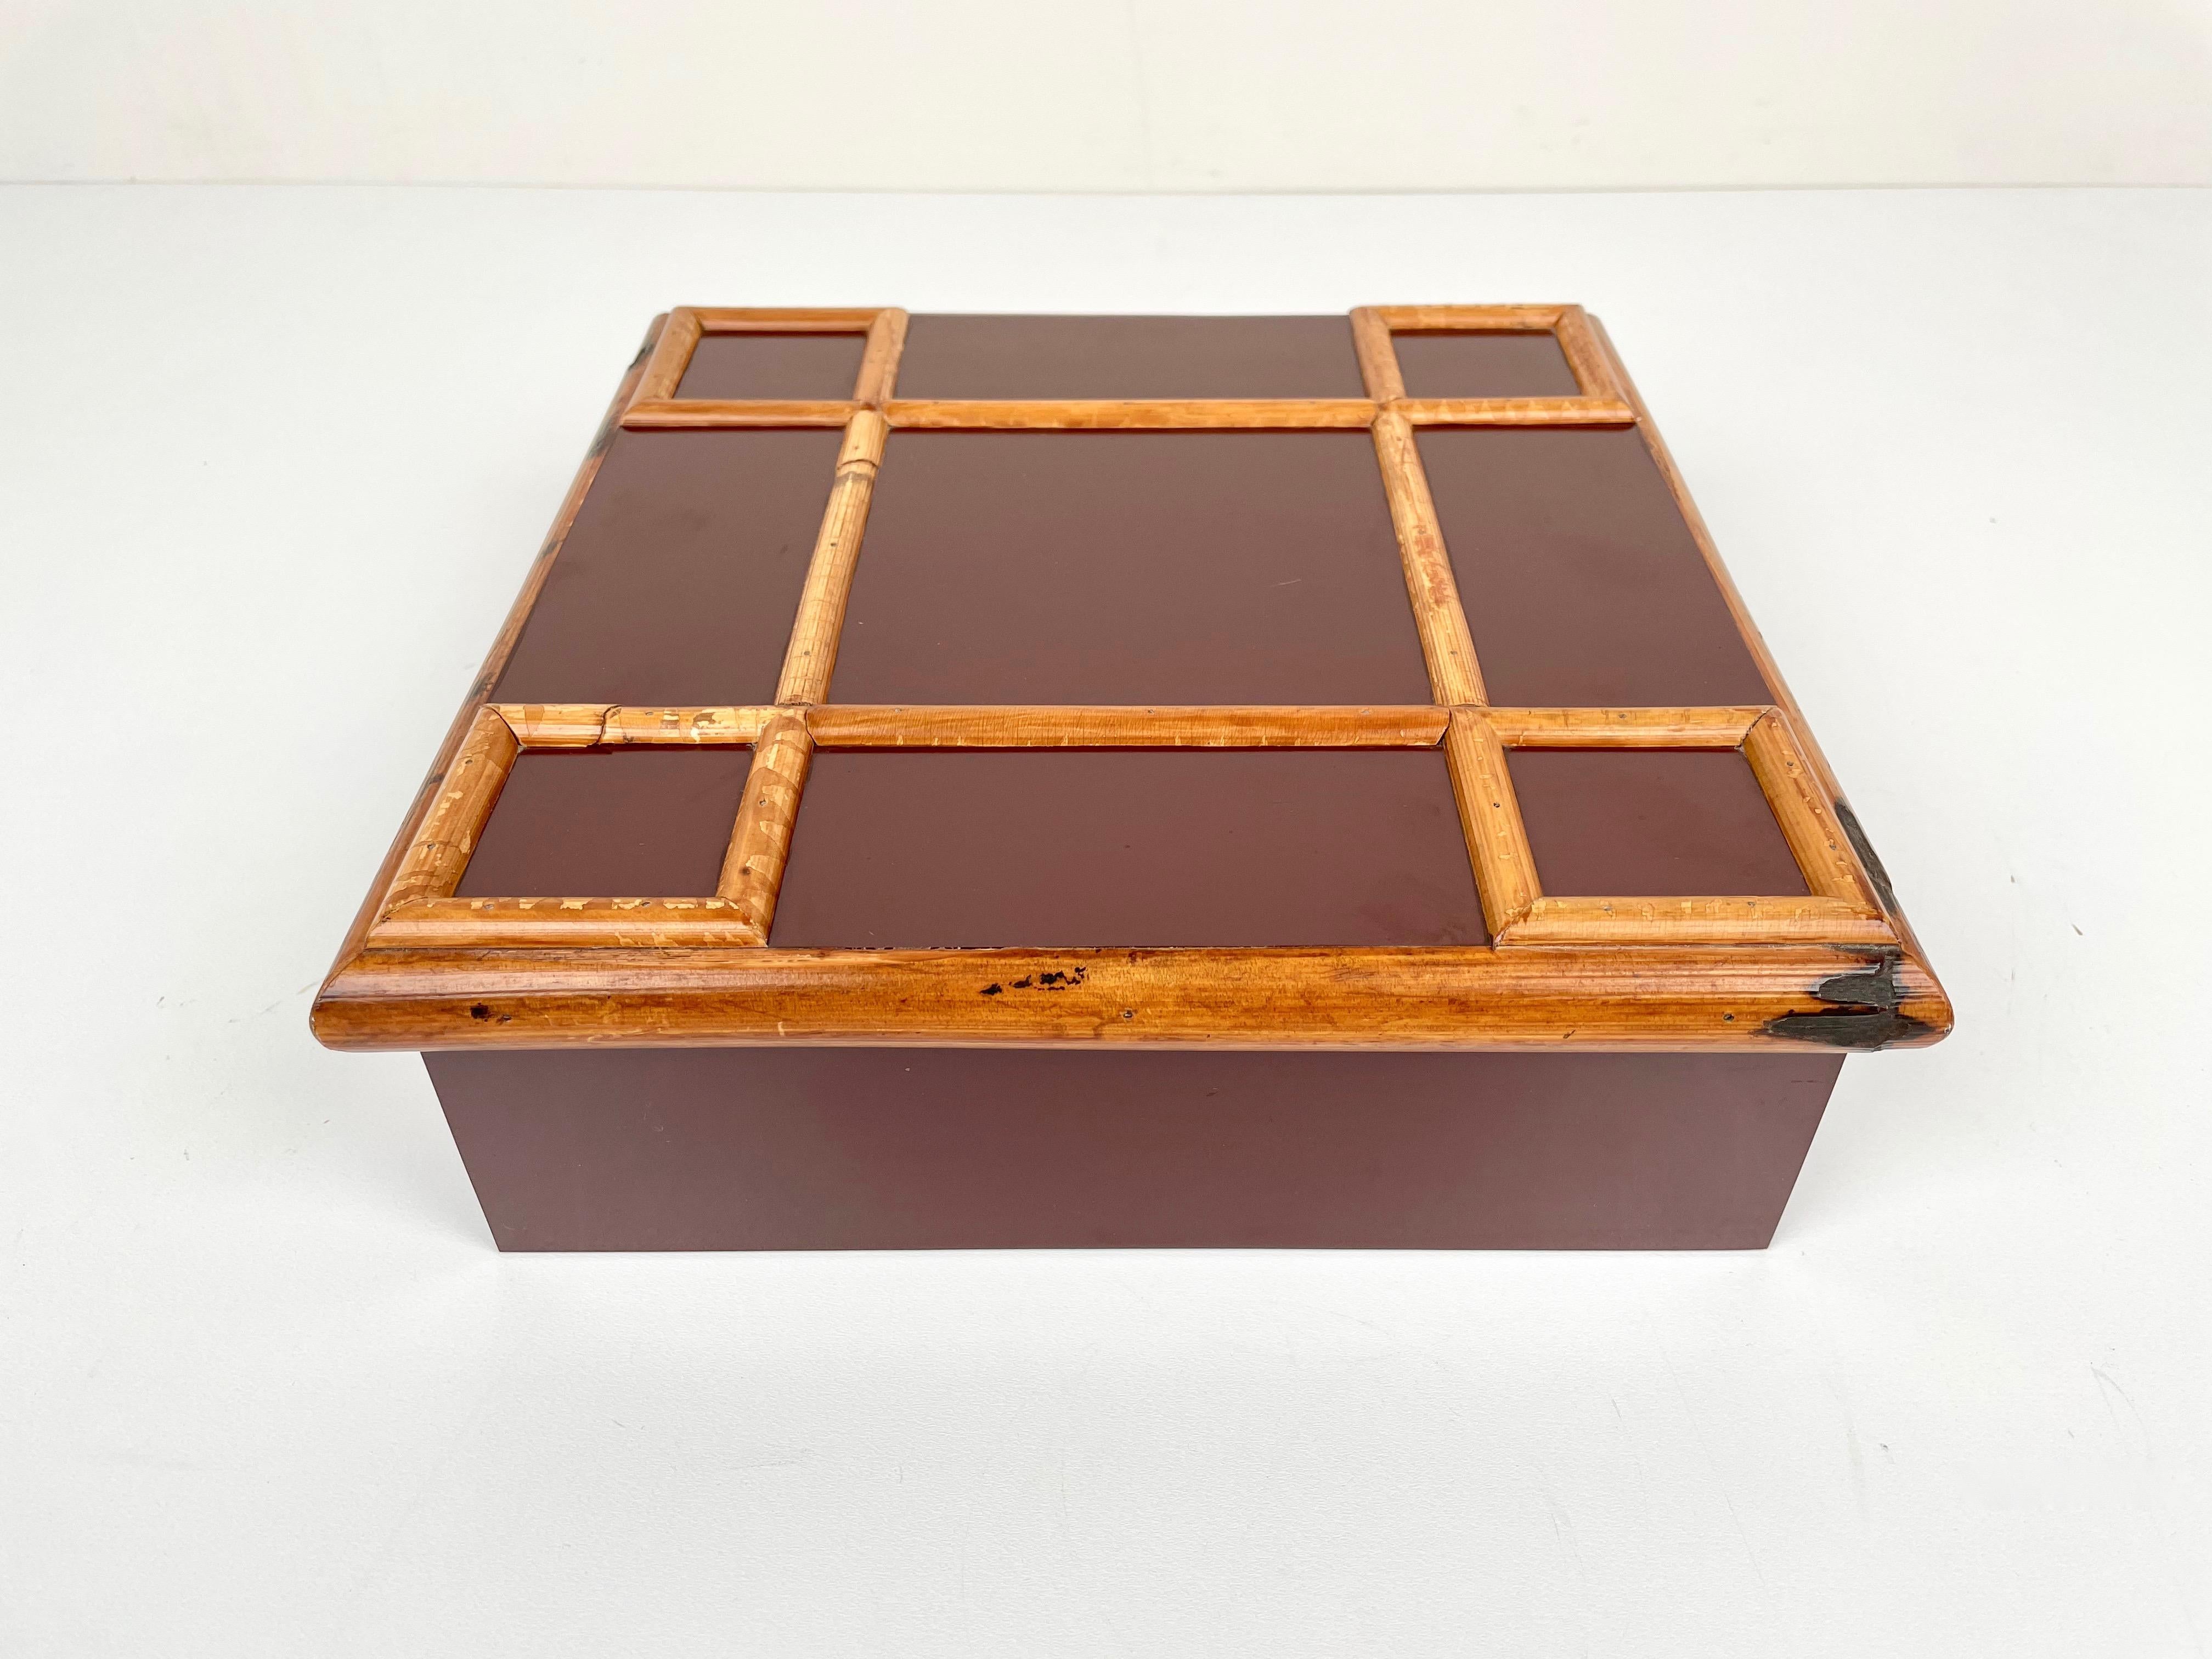 1960s squared burgundy box made of bamboo and wood by the Italian designer Tommaso Barbi. 
It comes with its original label still attached on the bottom, as shown in the photos.